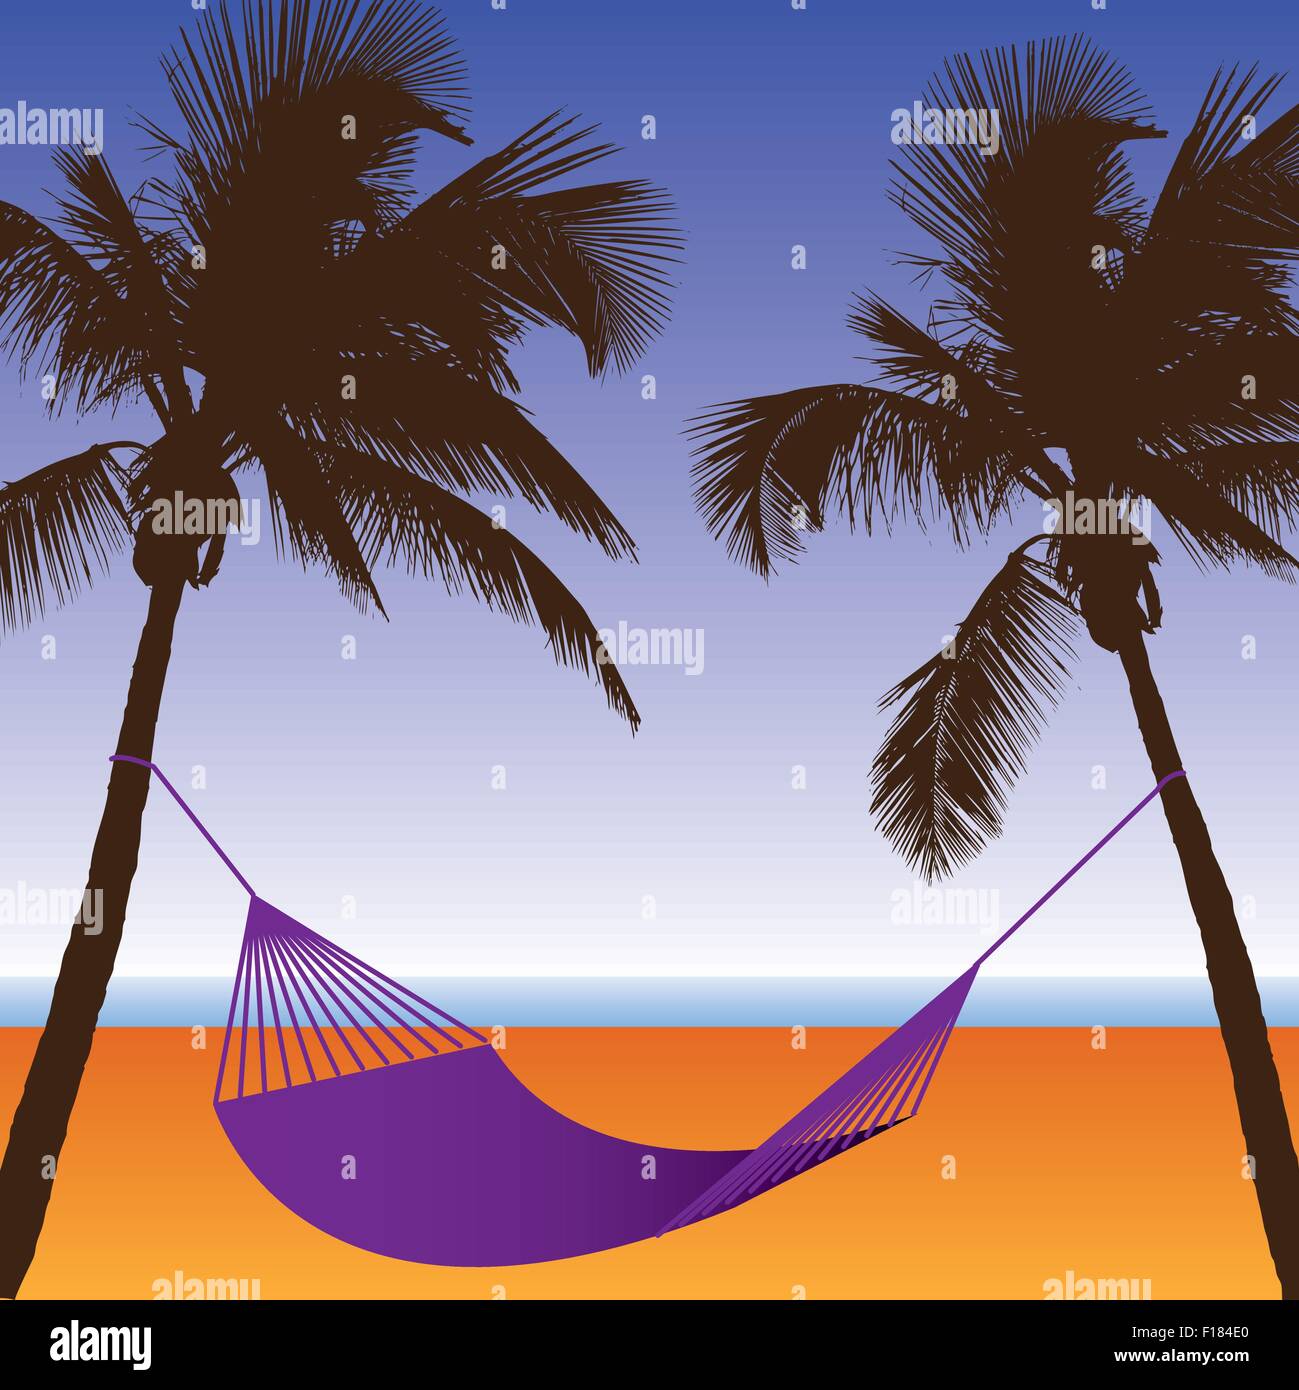 A Palm Tree And Hammock Beach Scene For Print Or Web Stock Vector Image